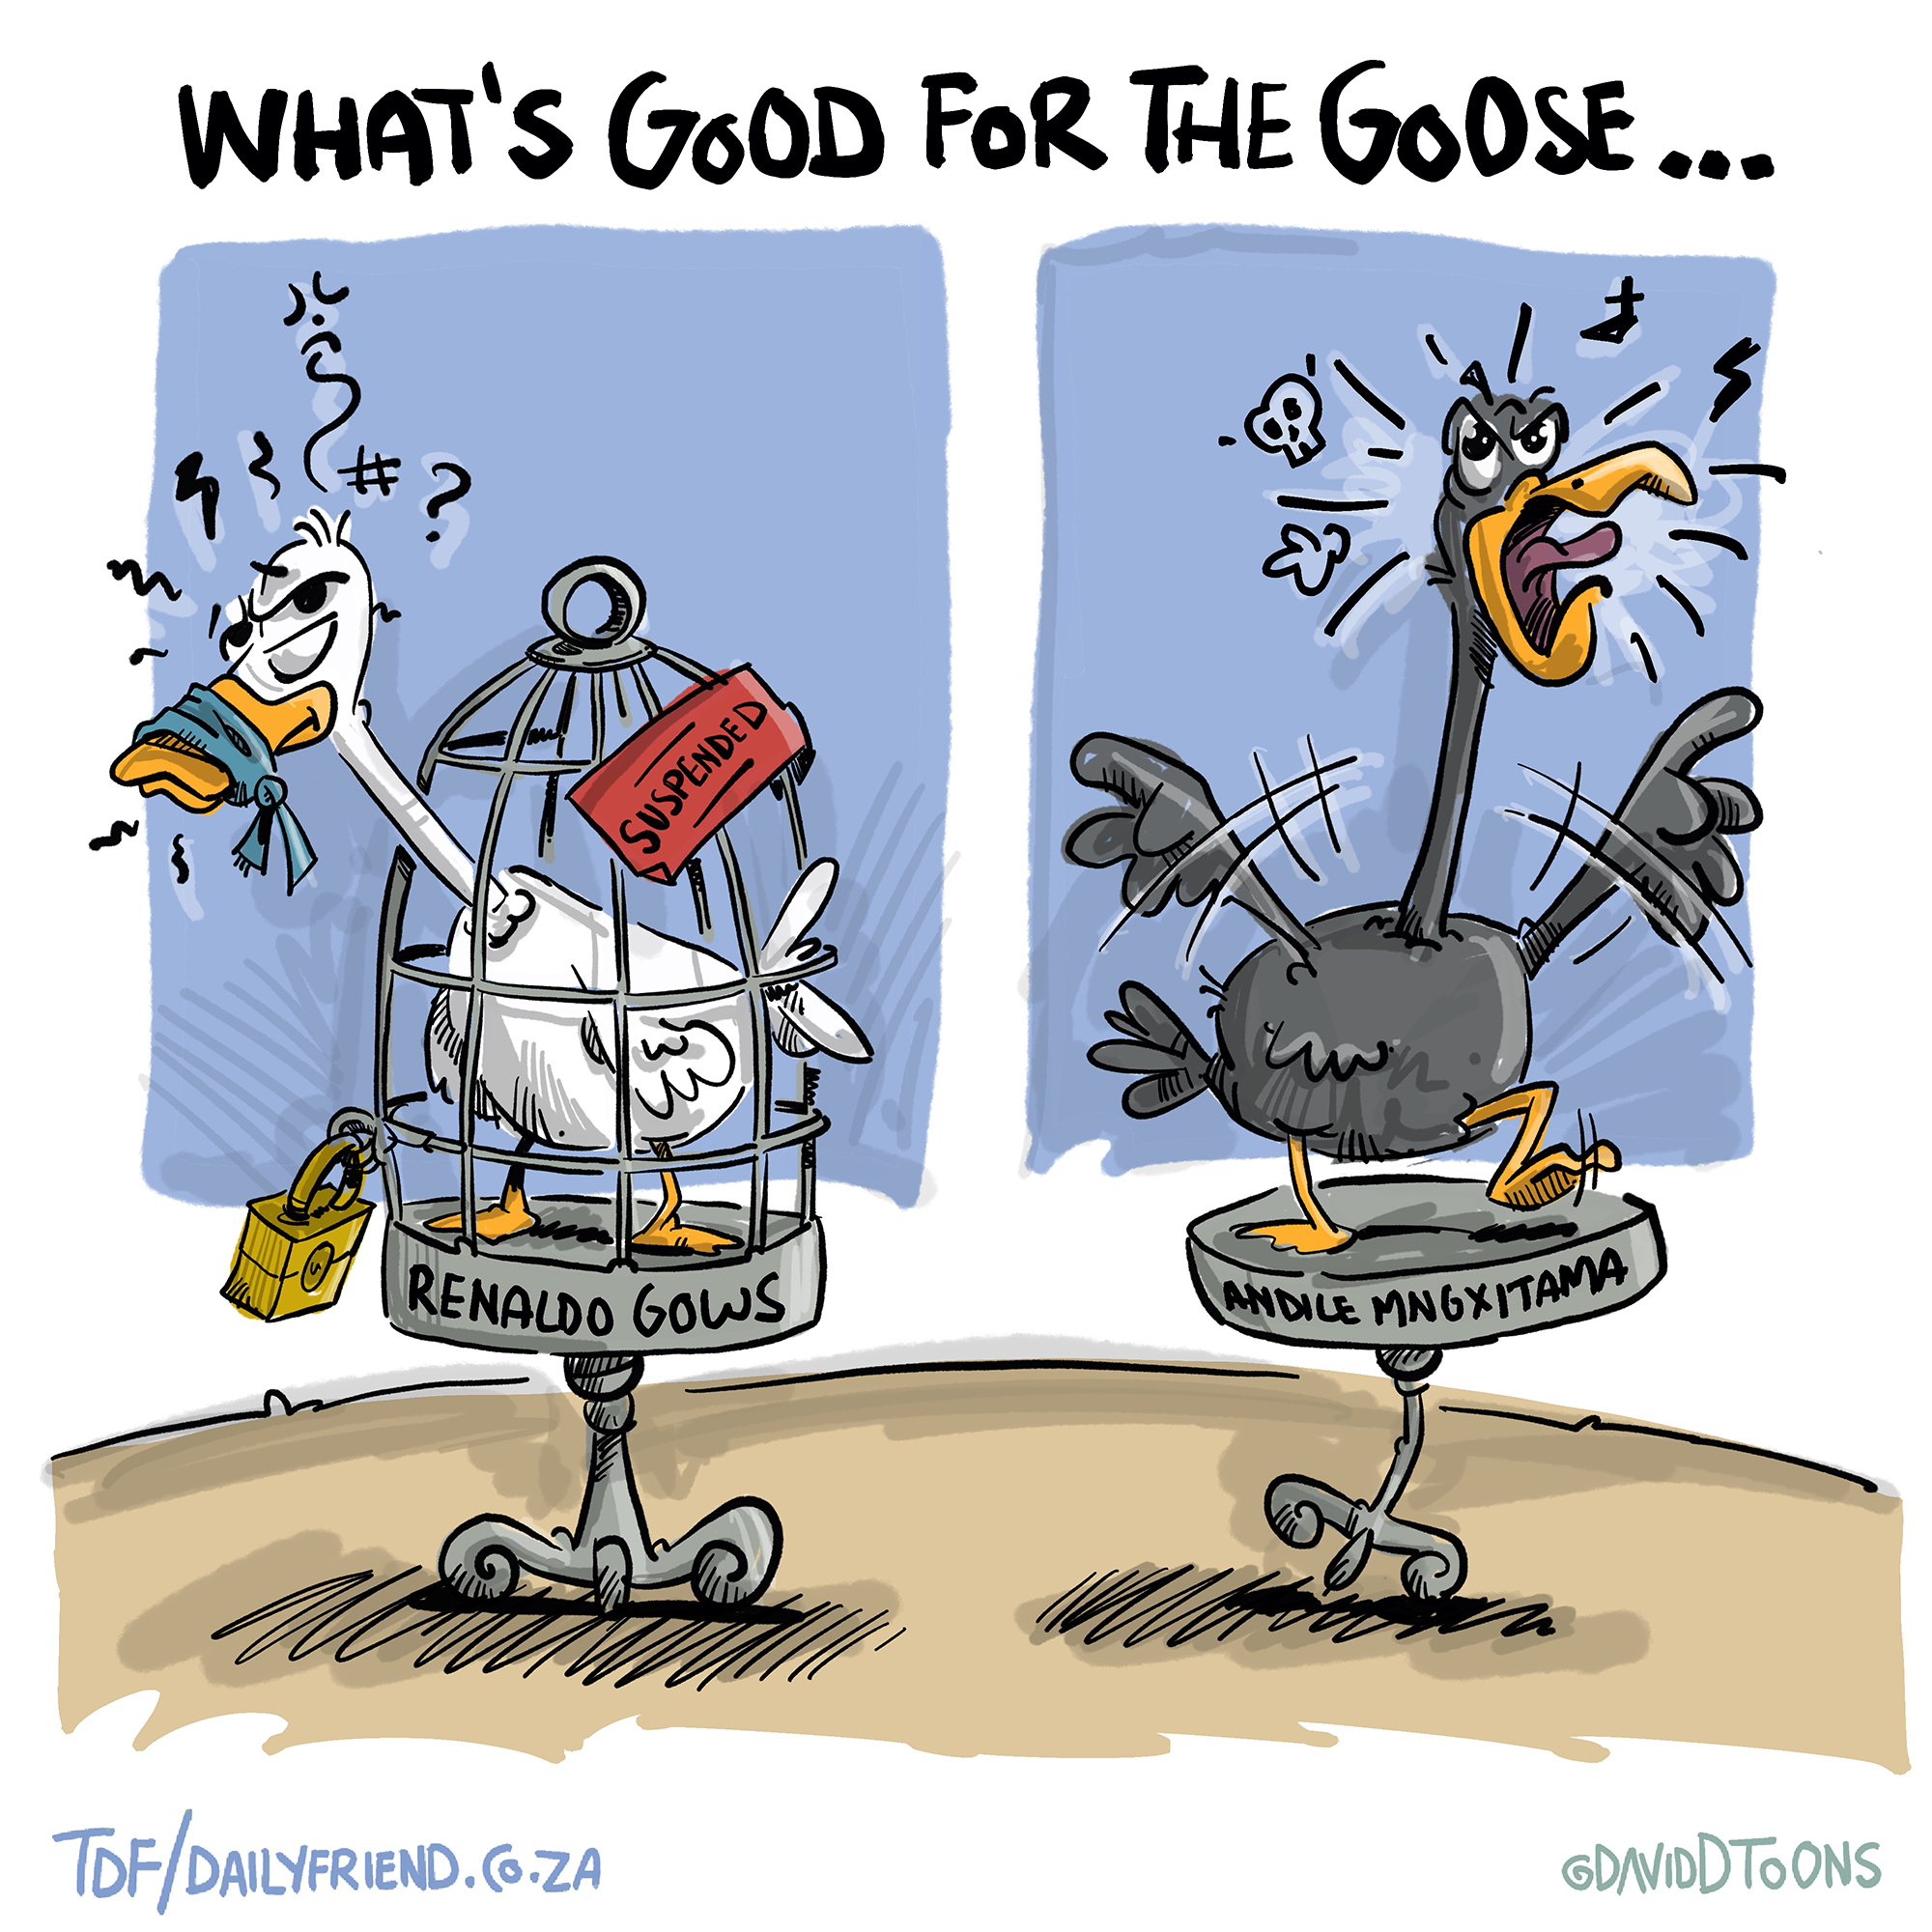 What’s good for the goose…